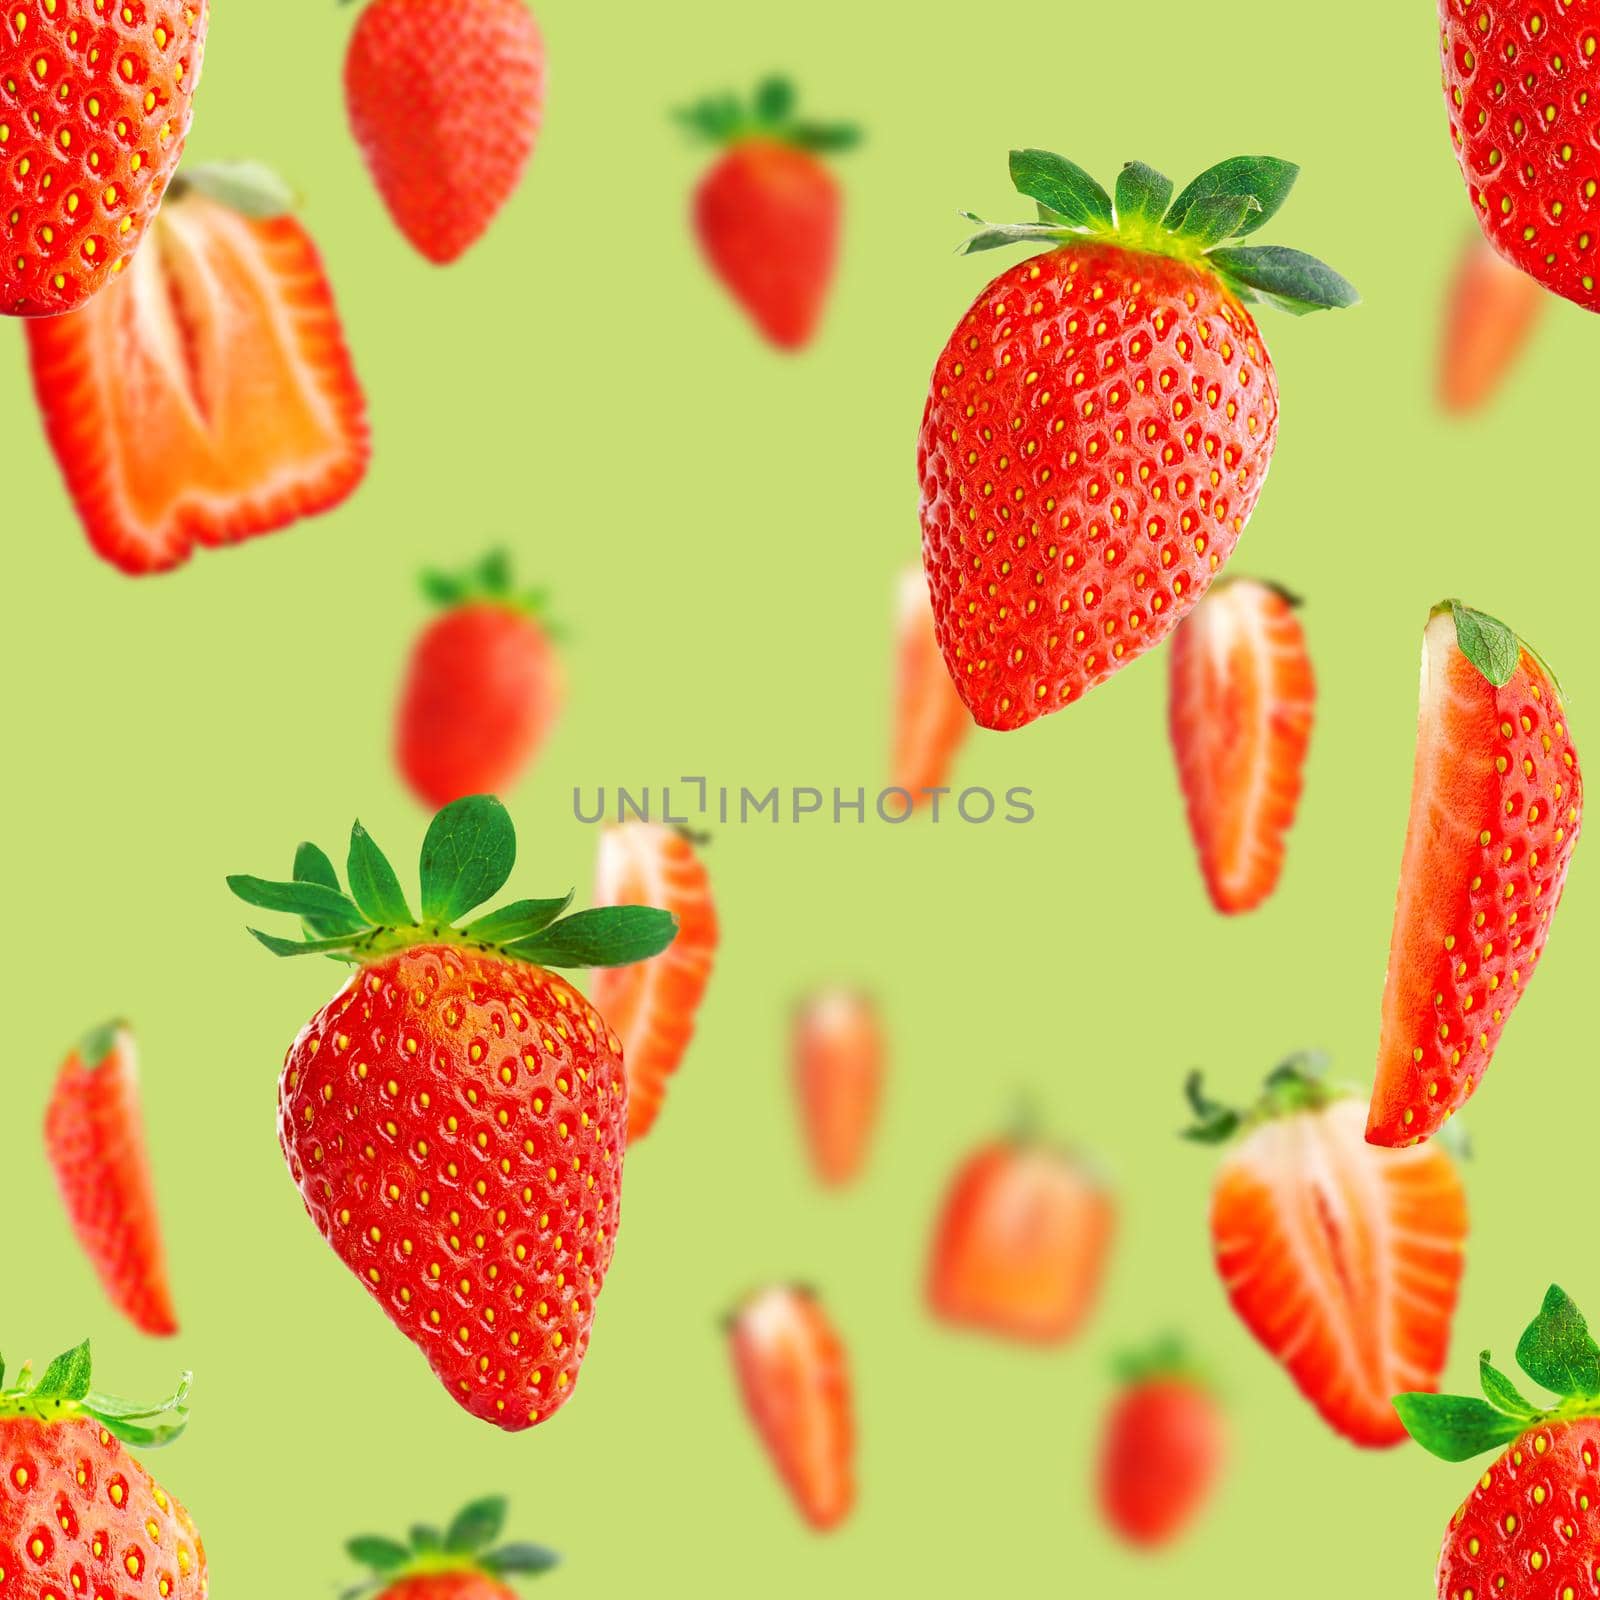 Fresh strawberry seamless pattern. Ripe strawberries isolated on green. Package design background. Falling strawberry selective focus.